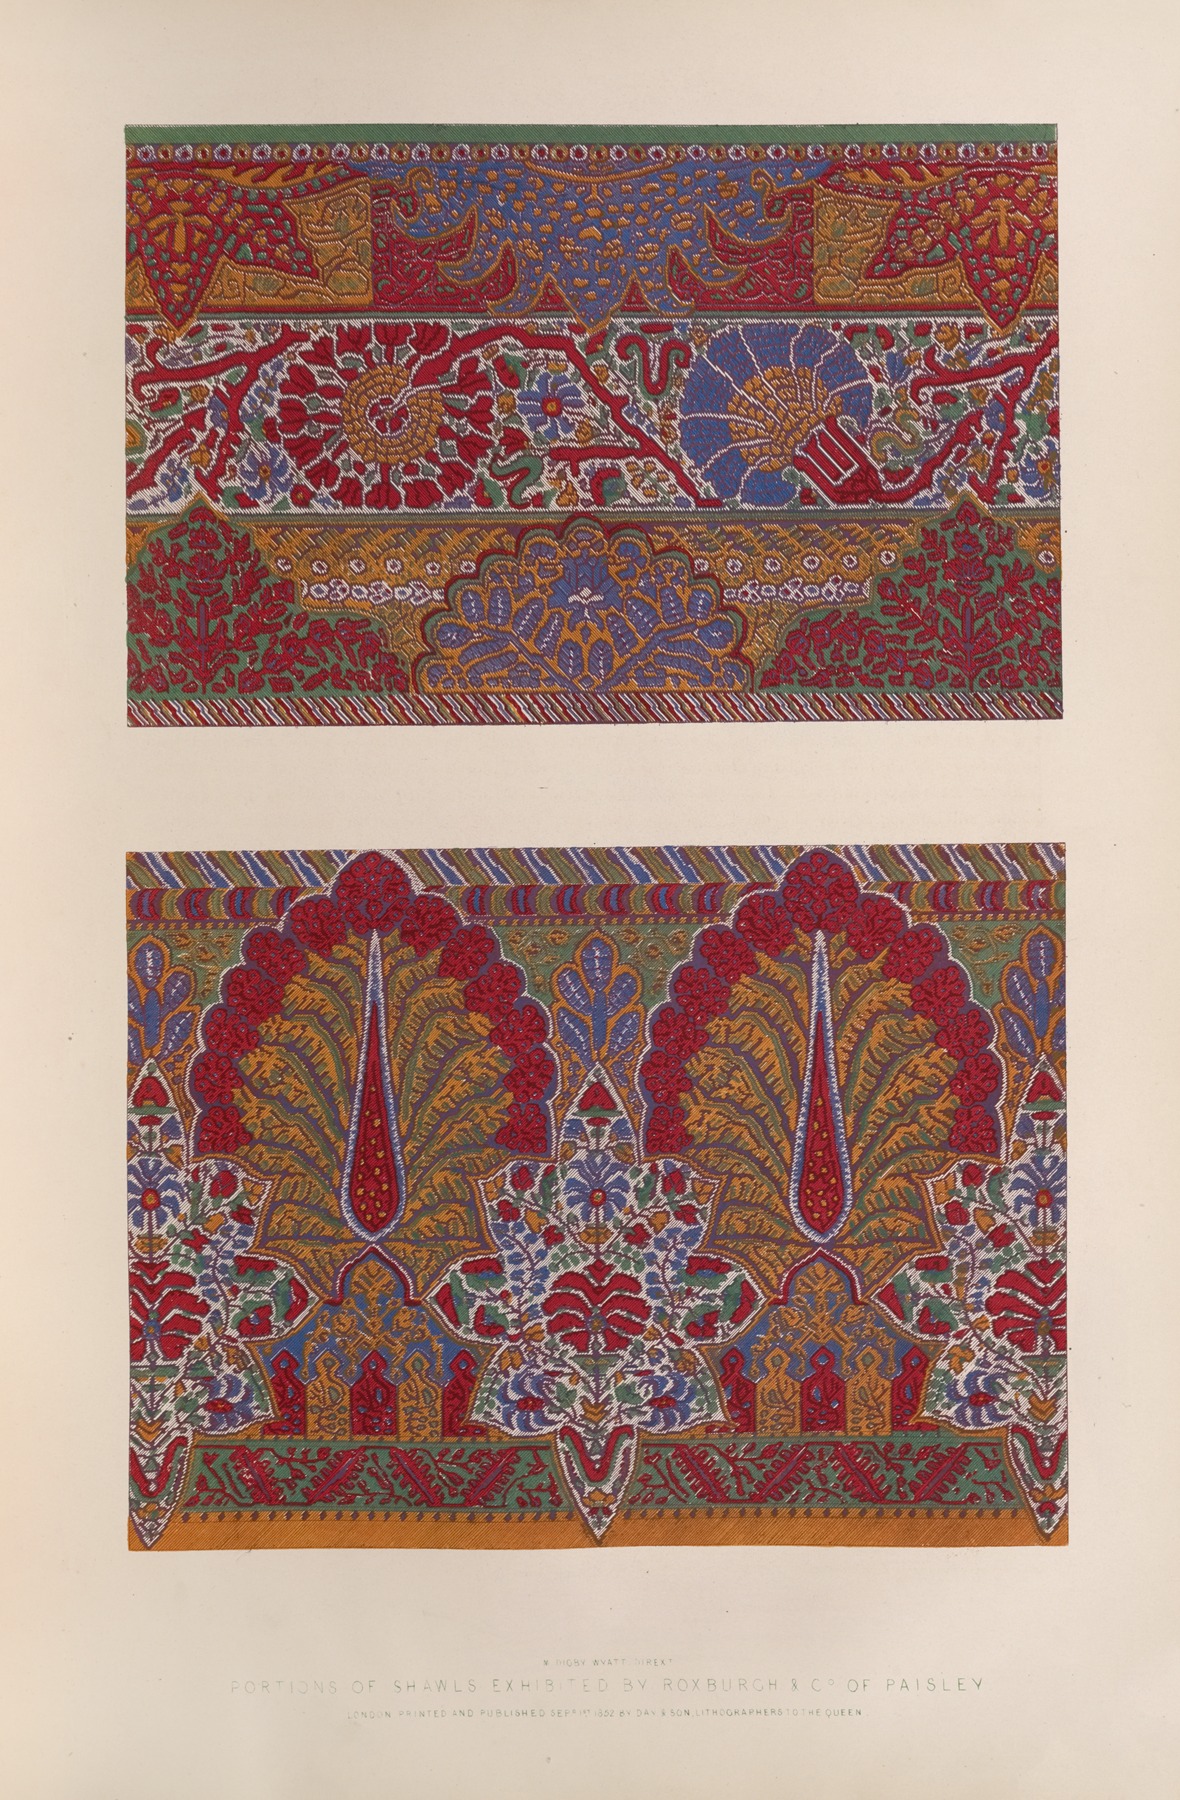 Matthew Digby Wyatt - Portions of shawls exhibited by Roxburch & co. of Paisley